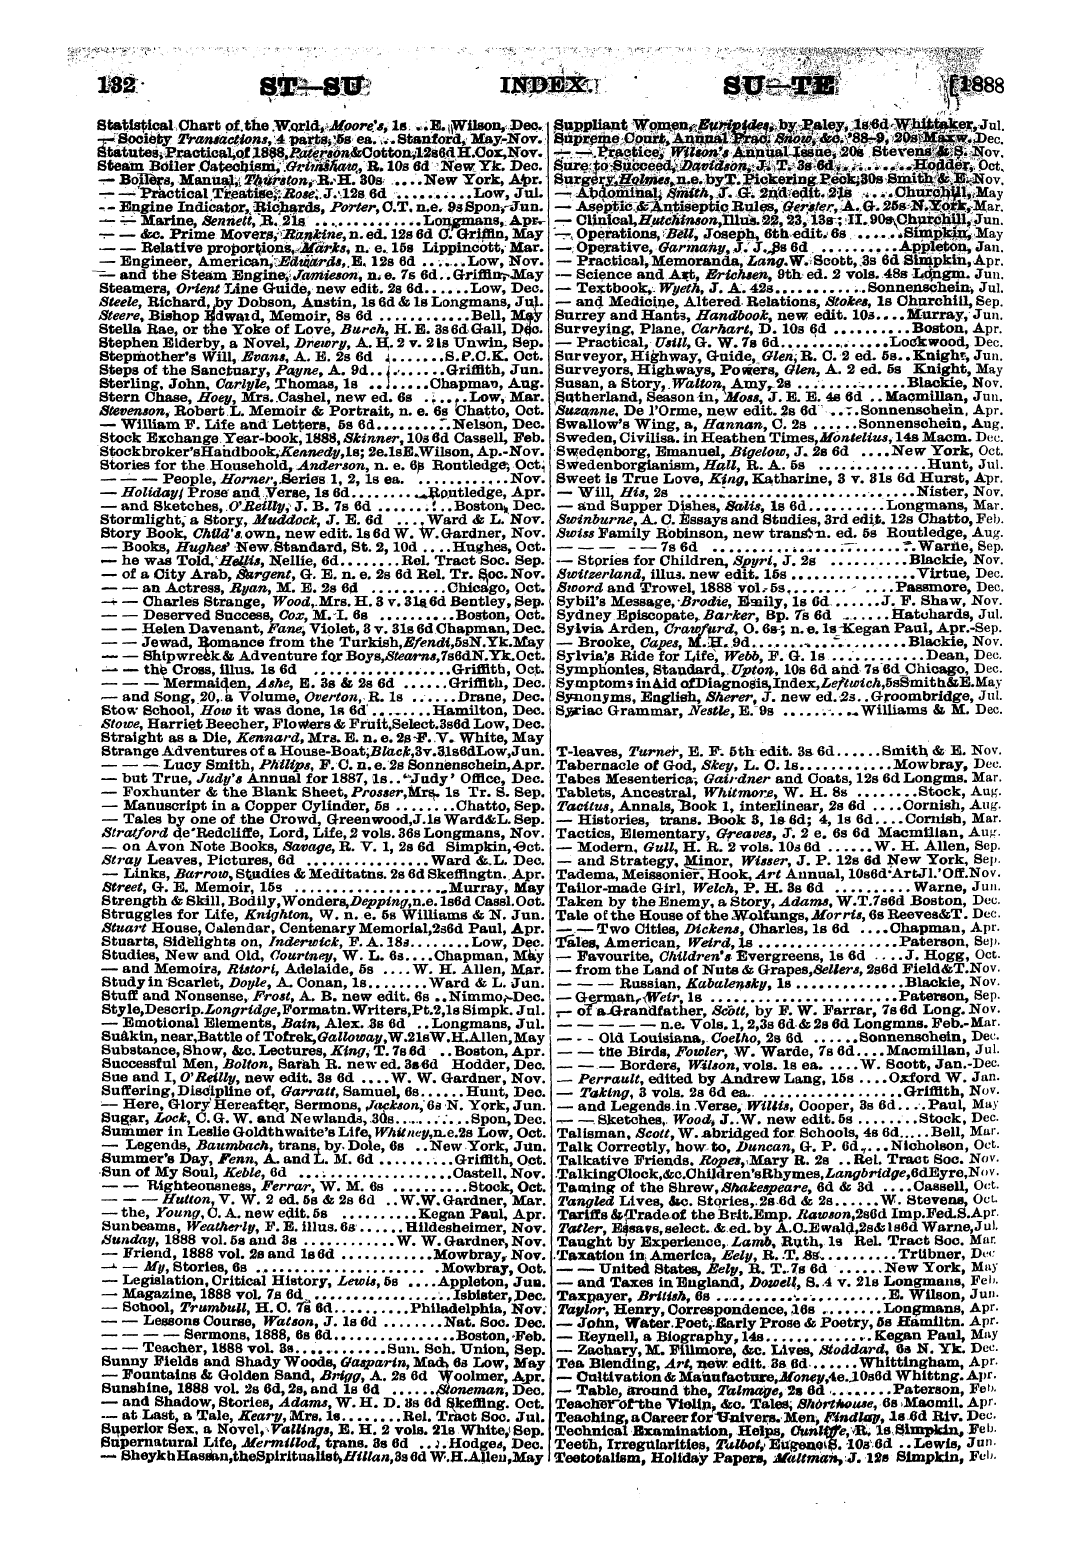 Publishers’ Circular (1880-1890): jS F Y, 1st edition - Untitled Article